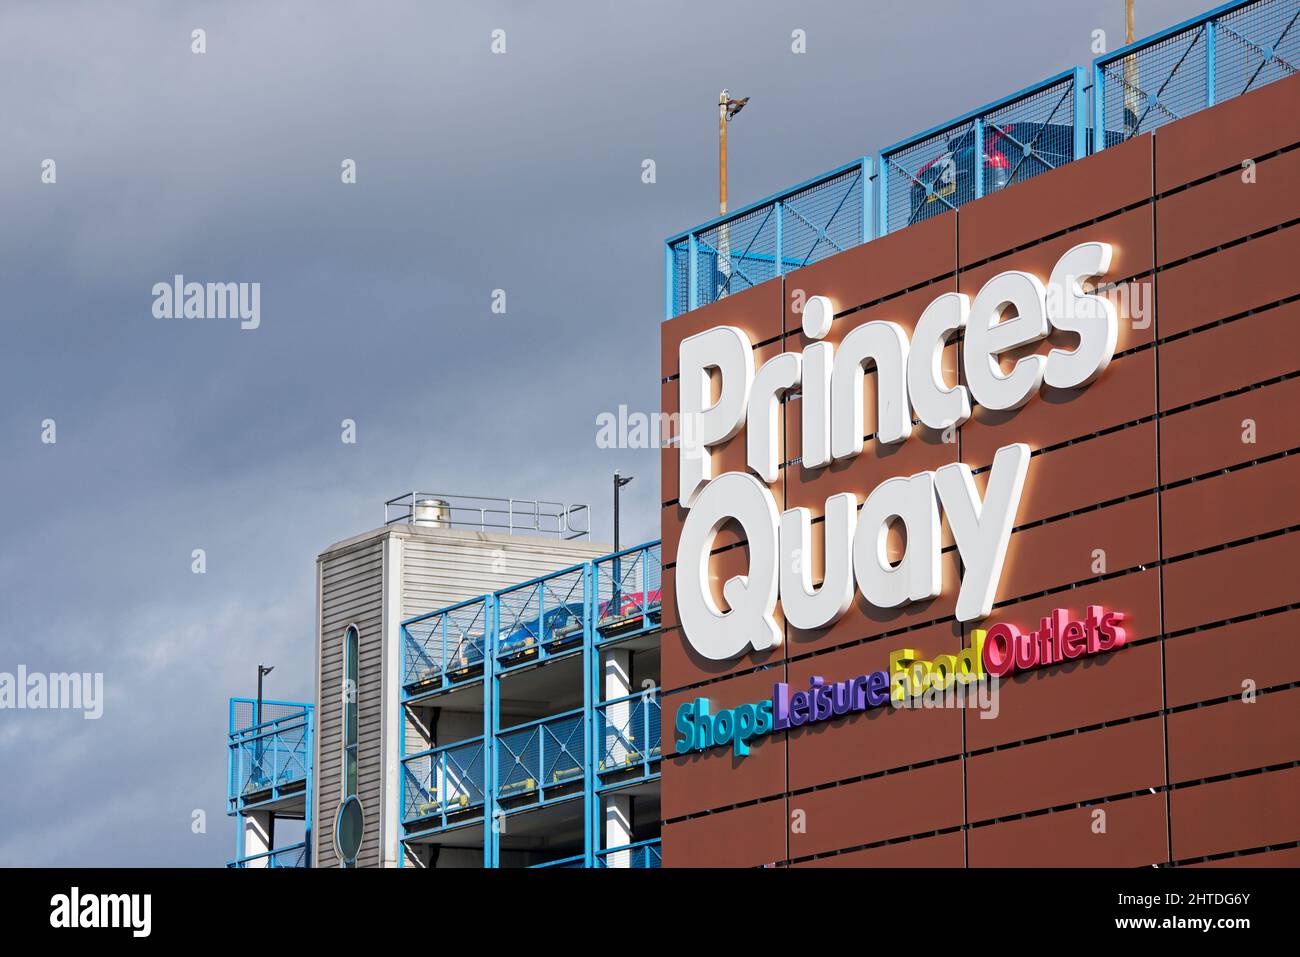 Sign for Princes Quay shopping centre in Hull, Humberside, East Yorkshire, England UK Stock Photo